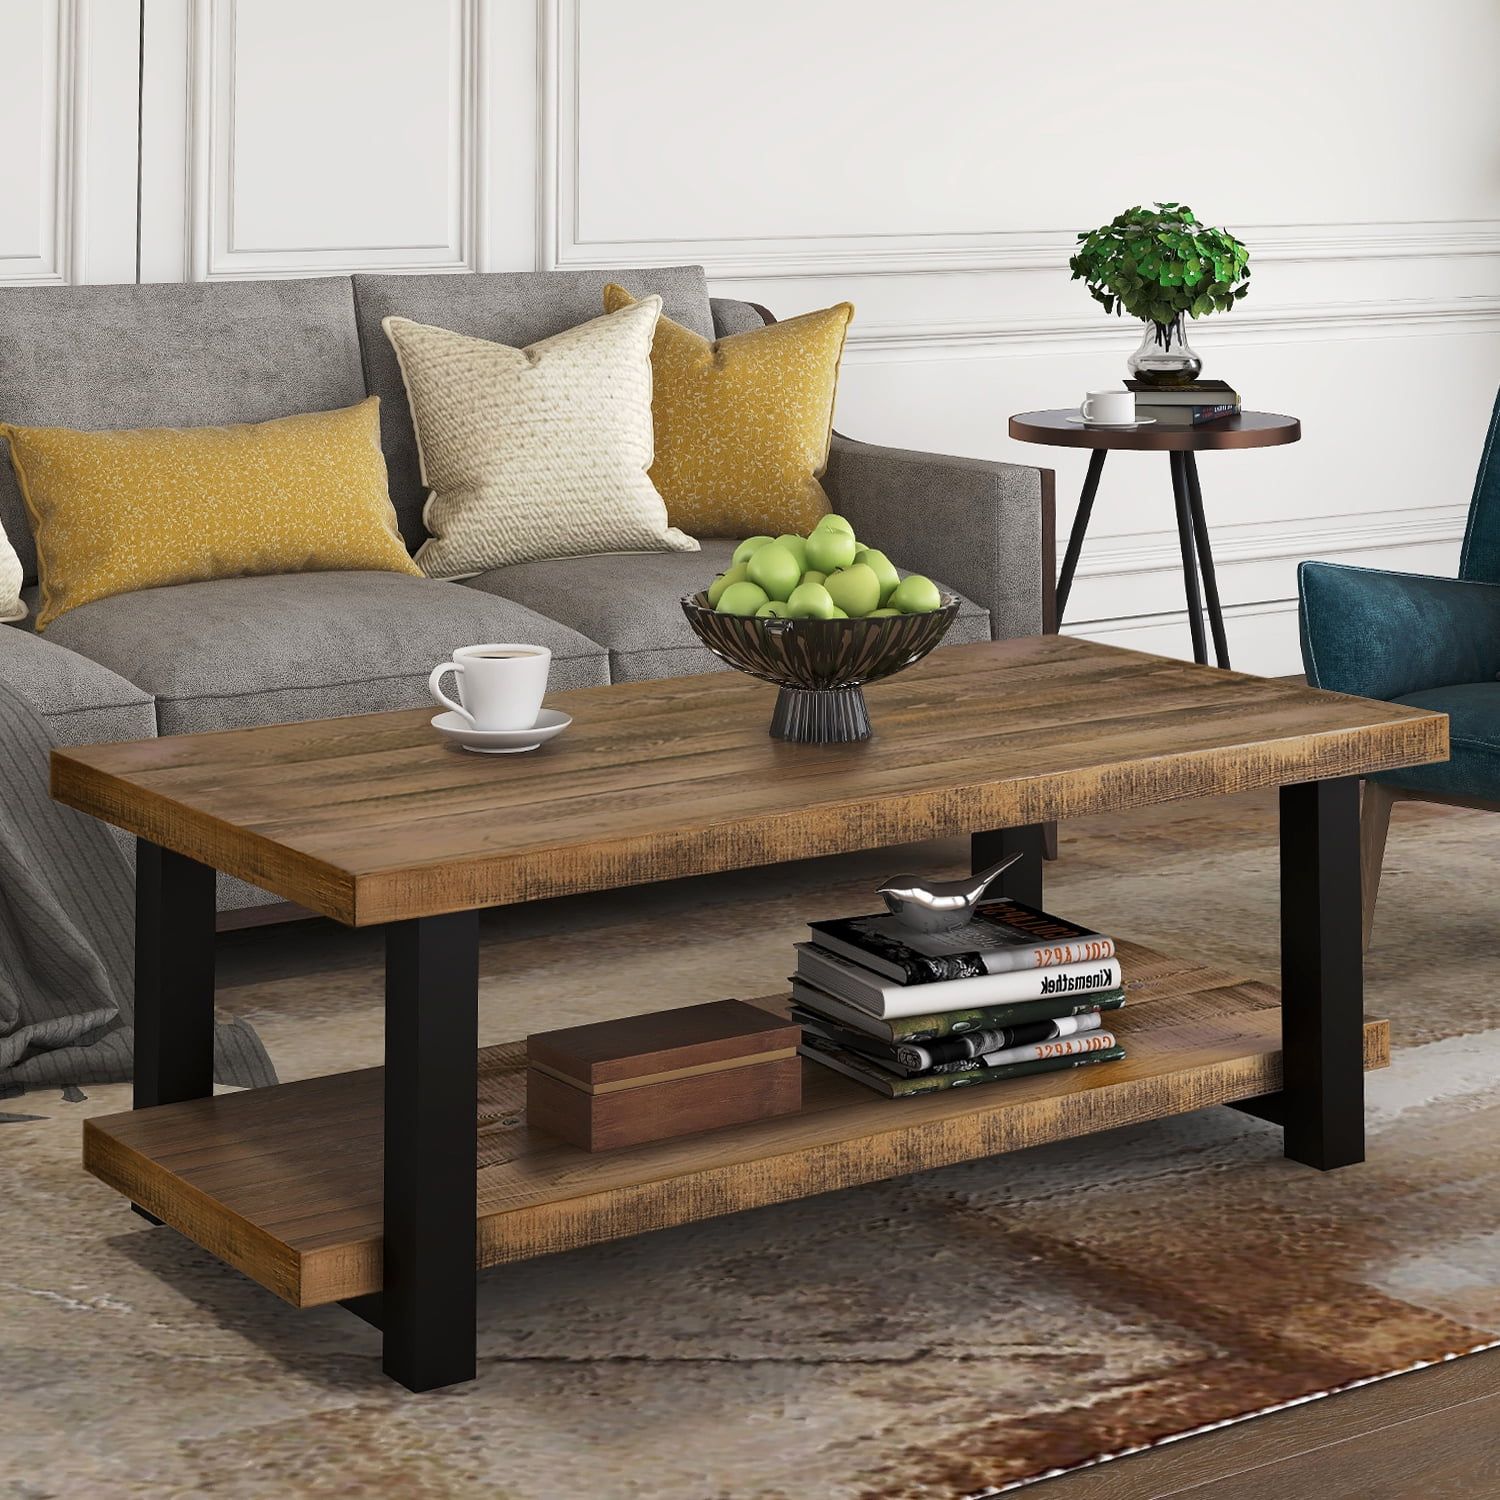 Topcobe Rustic Natural Coffee Table With Storage Shelf, Side End Table Inside Rustic Wood Coffee Tables (View 3 of 15)